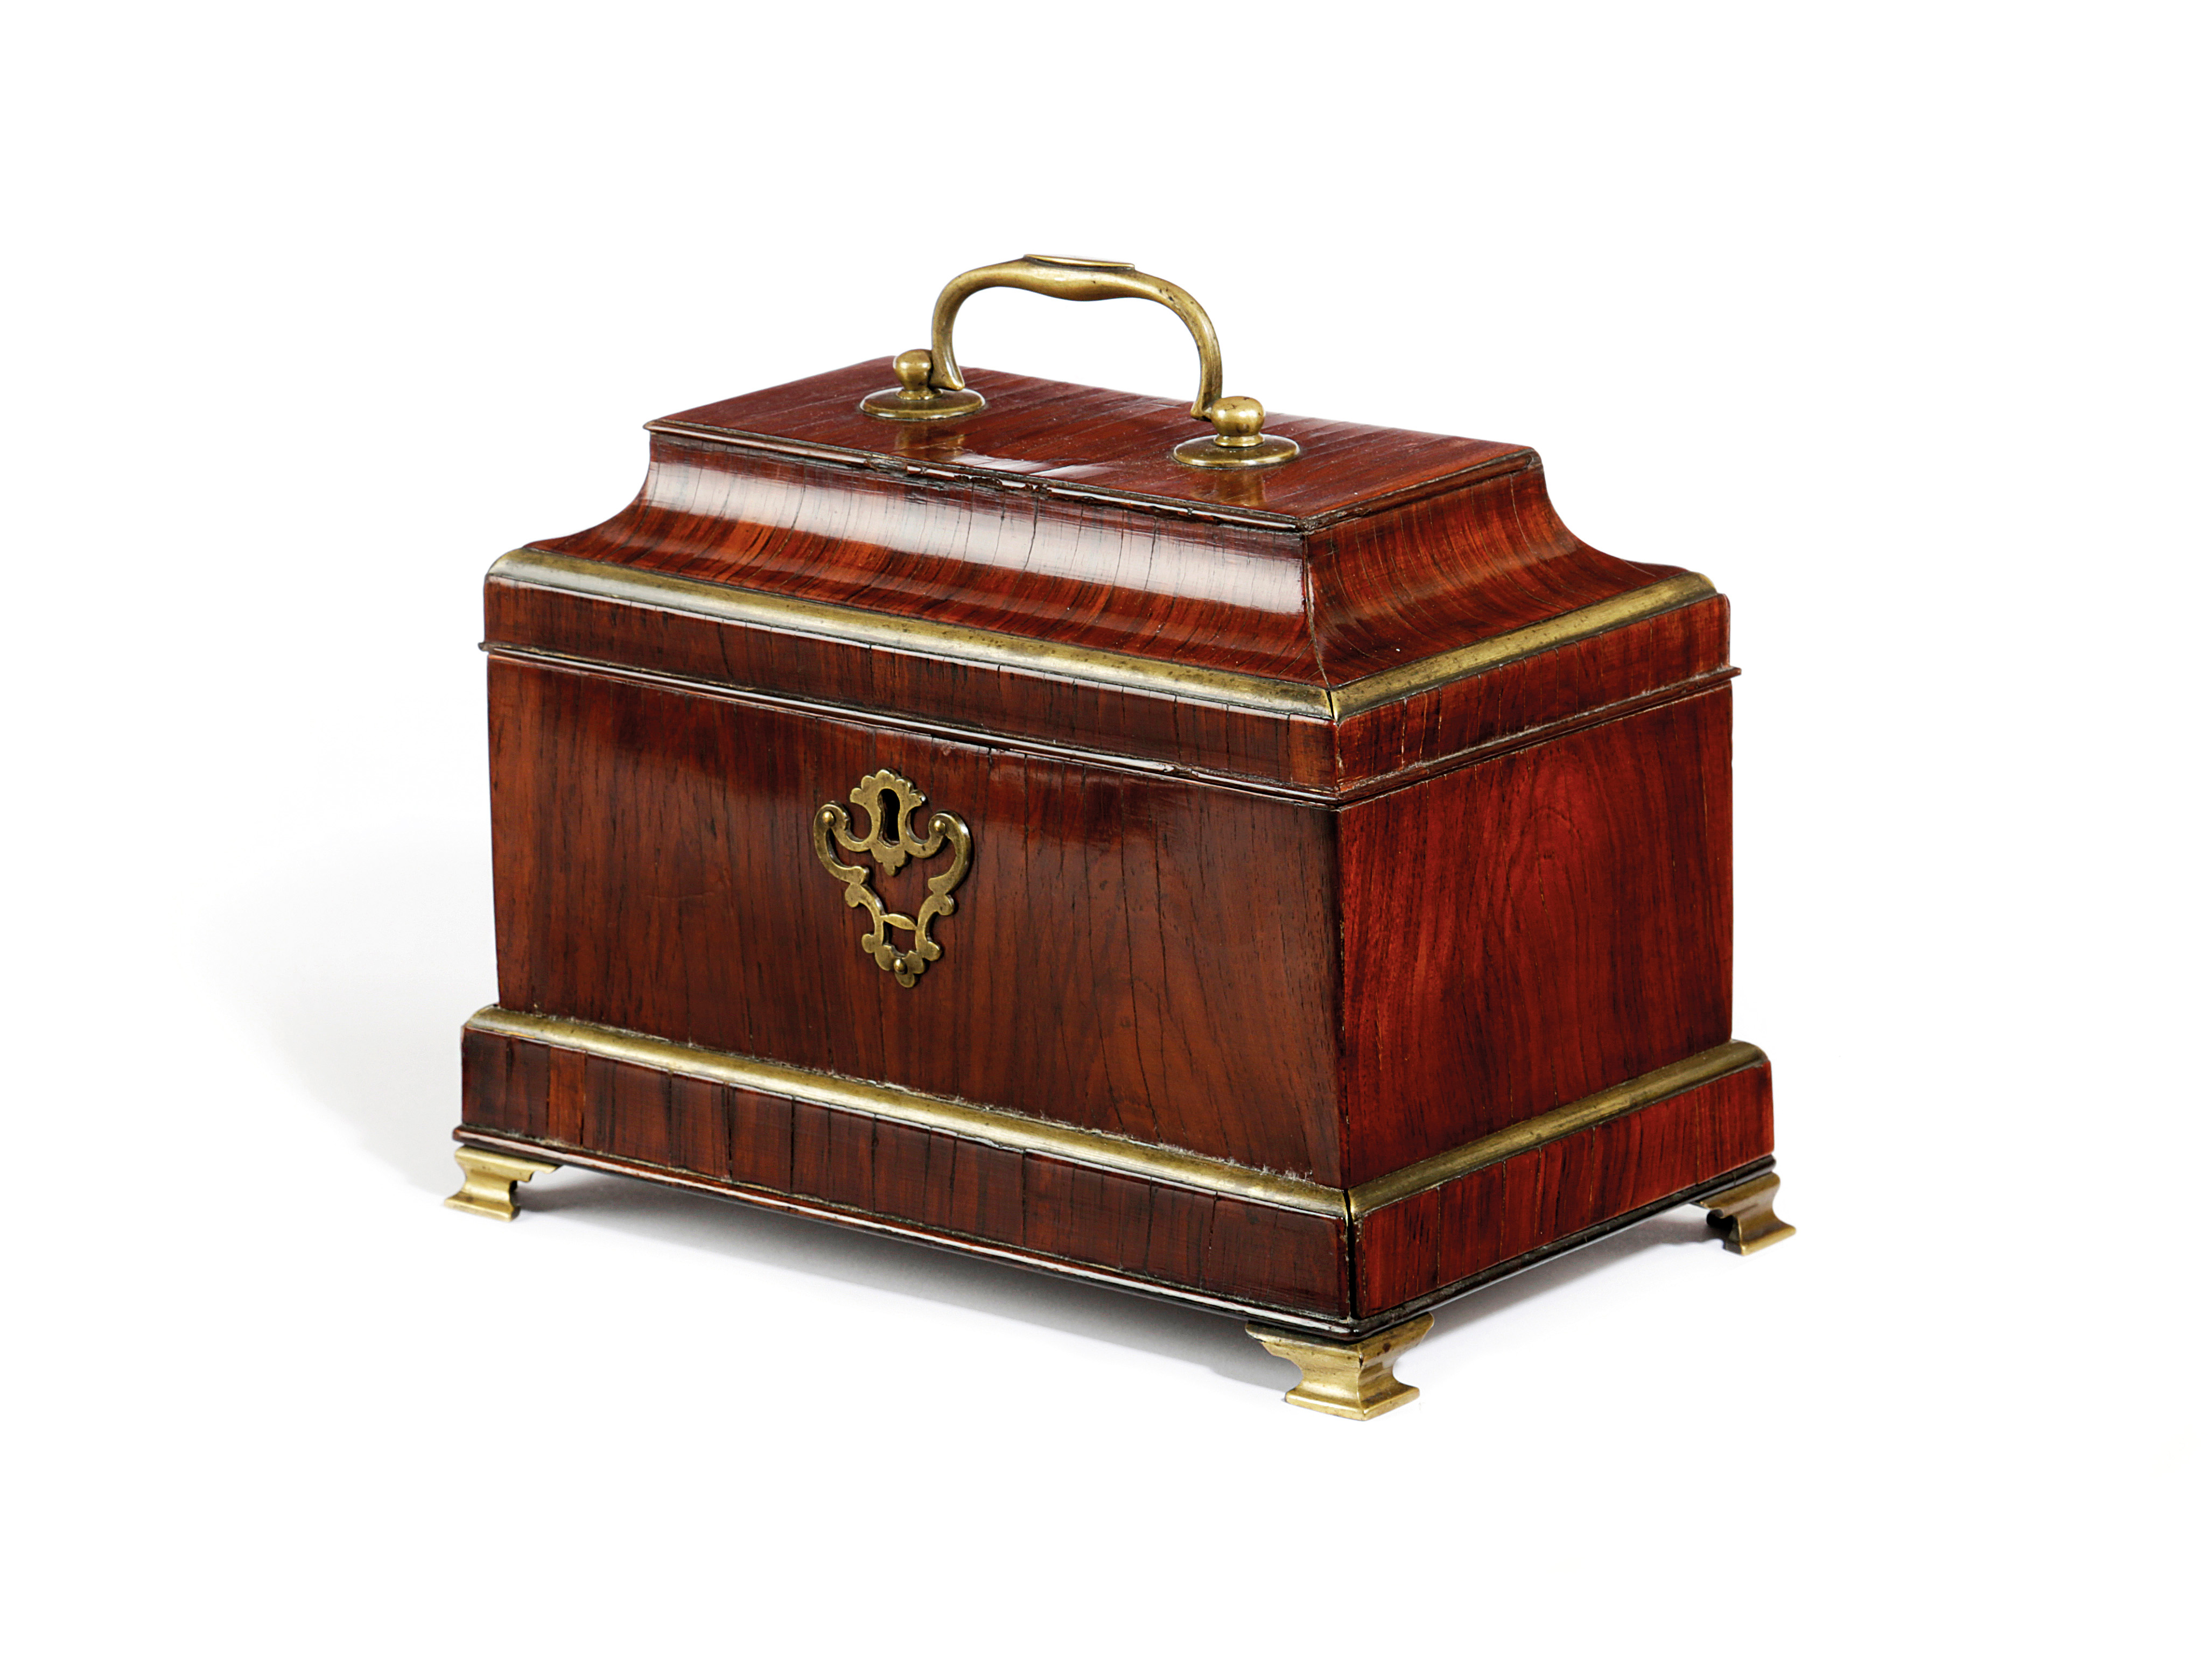 A GERMAN KINGWOOD AND BRASS MOUNTED TEA CHEST ATTRIBUTED TO ABRAHAM ROENTGEN, C.1750-60 the